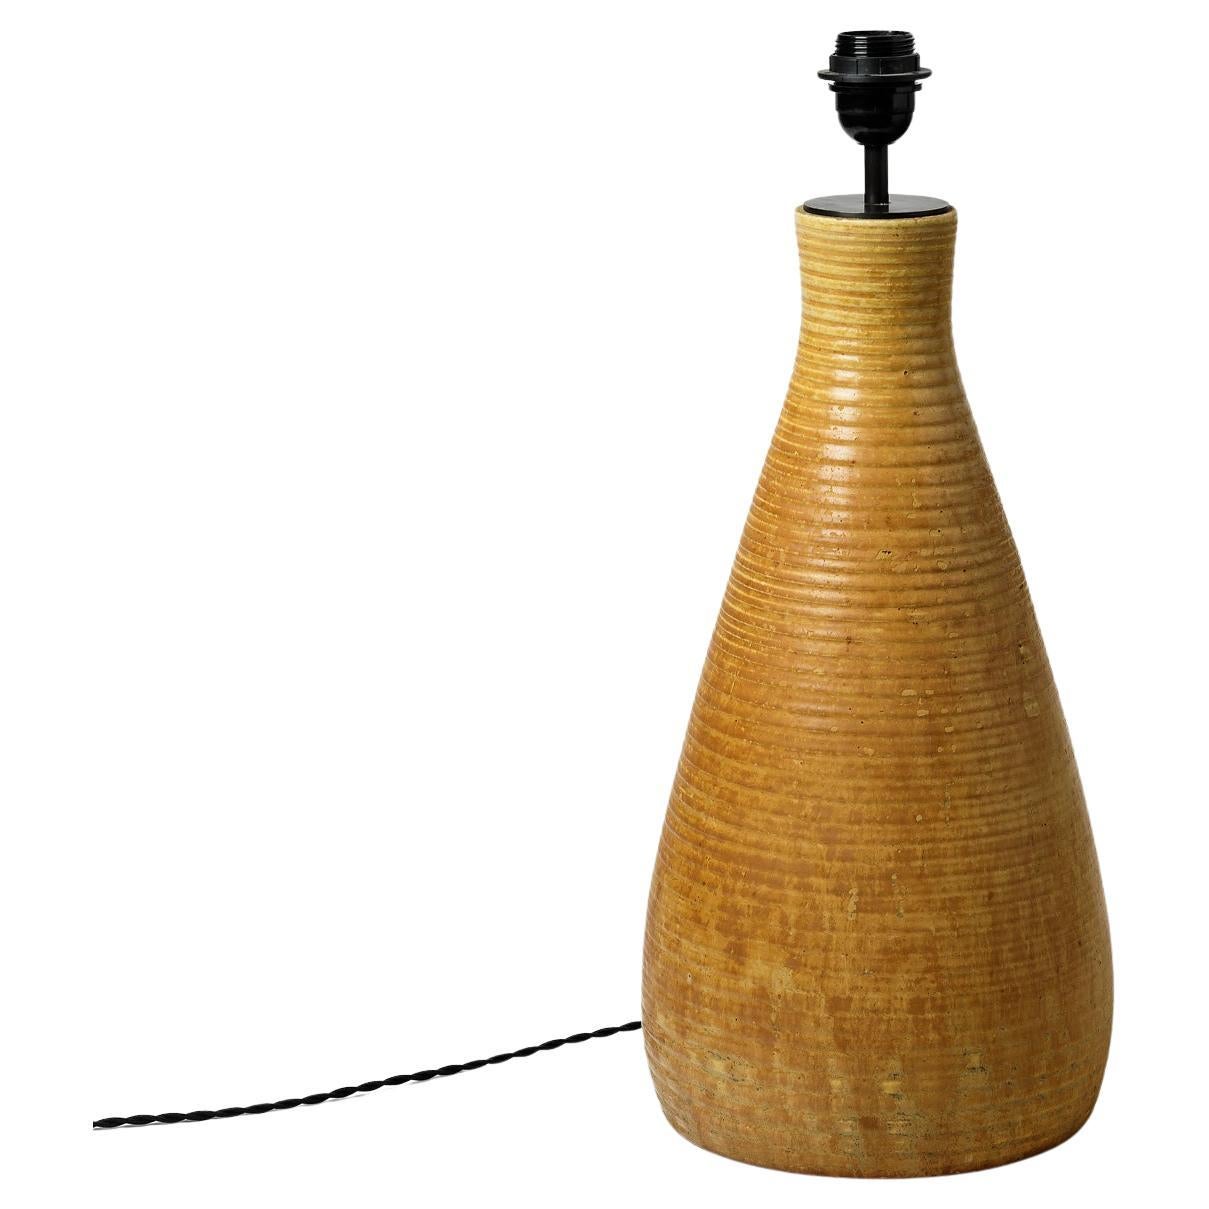 Glazed ceramic lamp by Les potiers d’Accolay, circa 1960-1970